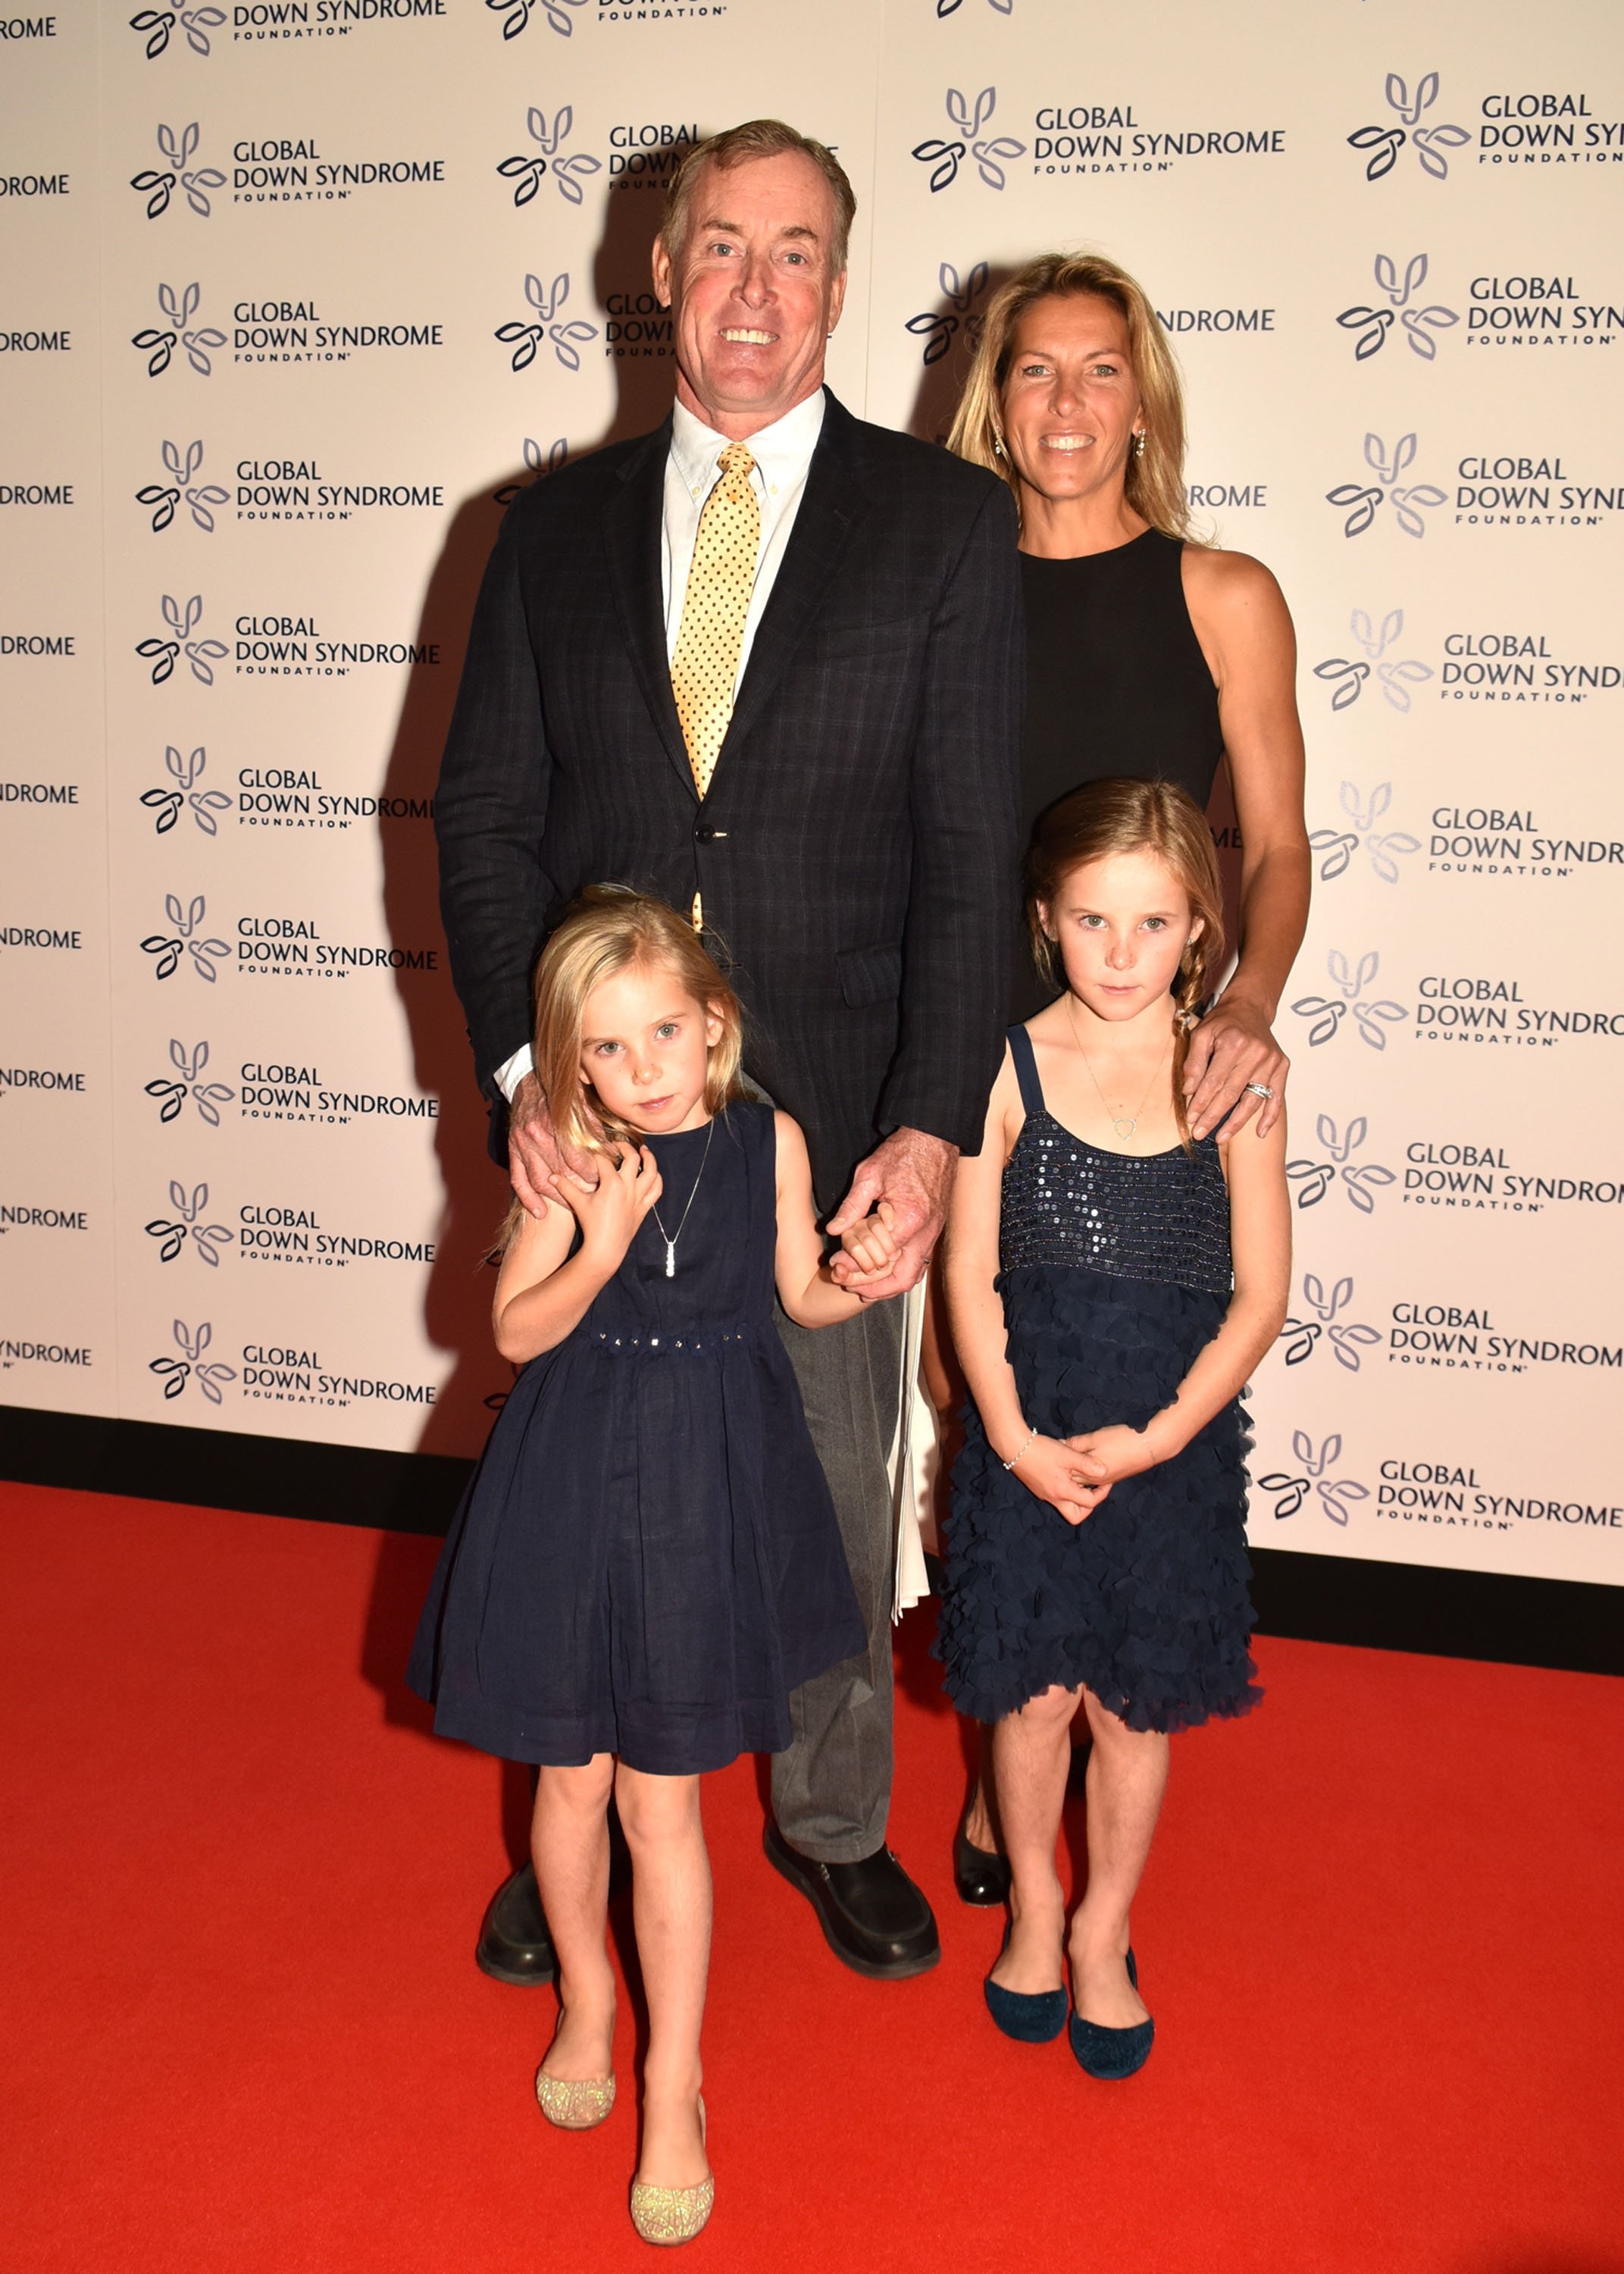 John C. McGinley and family at Colorado Convention Center on October 24, 2015, in Denver, Colorado. I Source: Getty Images